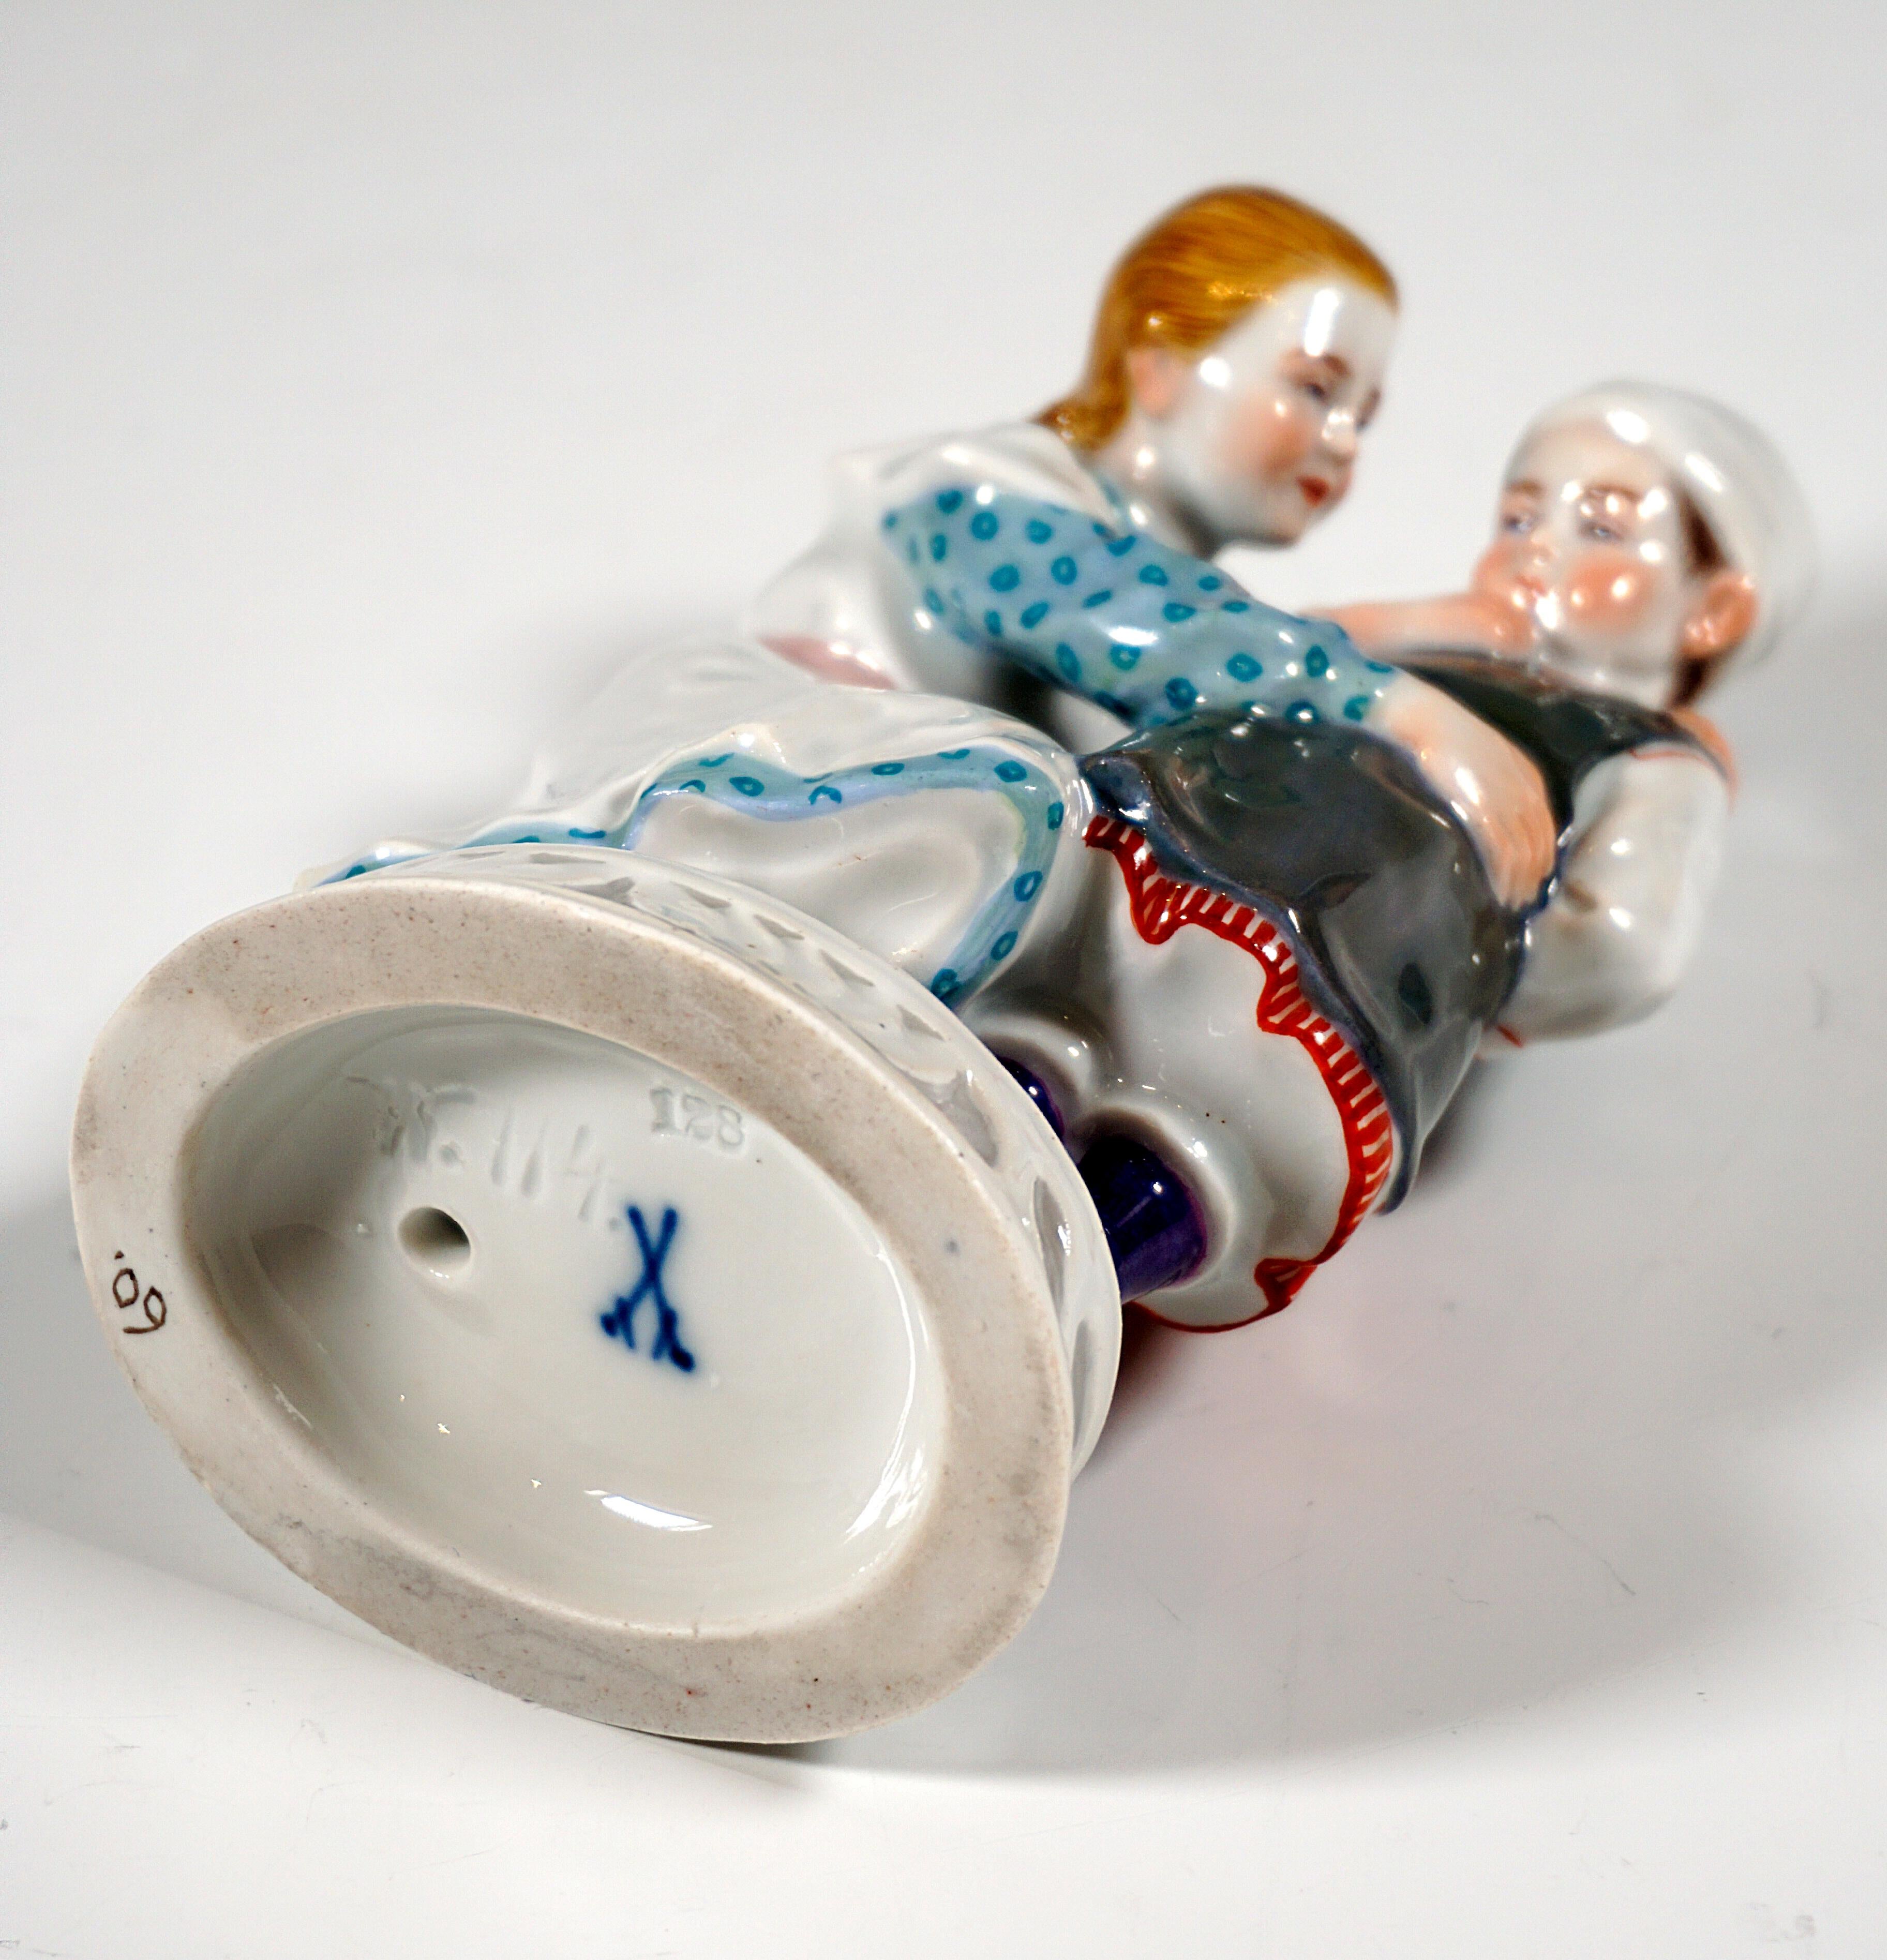 Hand-Crafted Art Nouveau Children Group 'Girl with Child', A. Koenig, Meissen Germany, c 1905 For Sale